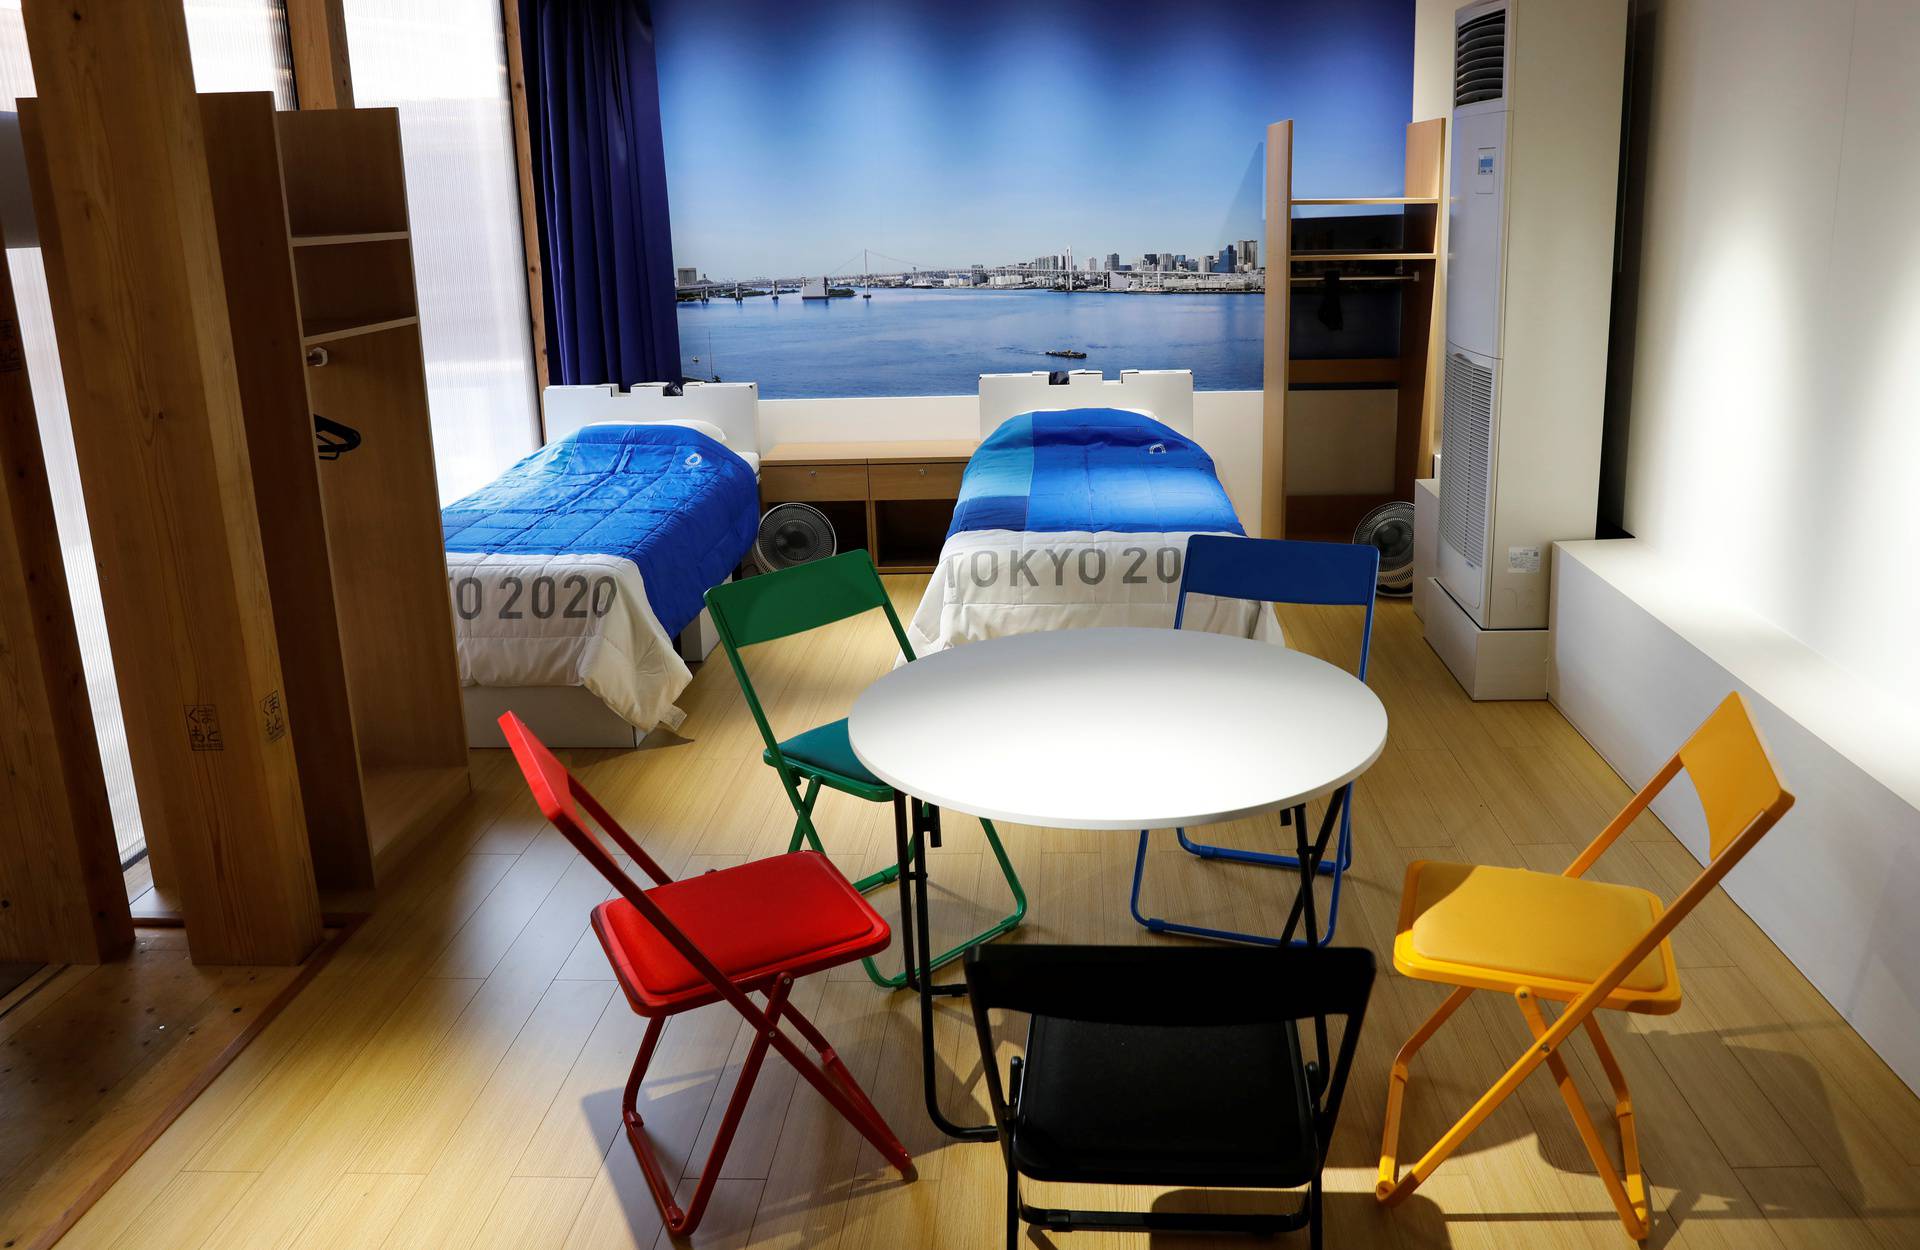 A replica of ahtletes' room is displayed at the village plaza of the Tokyo 2020  Olympic and Paralympic Village  in Tokyo